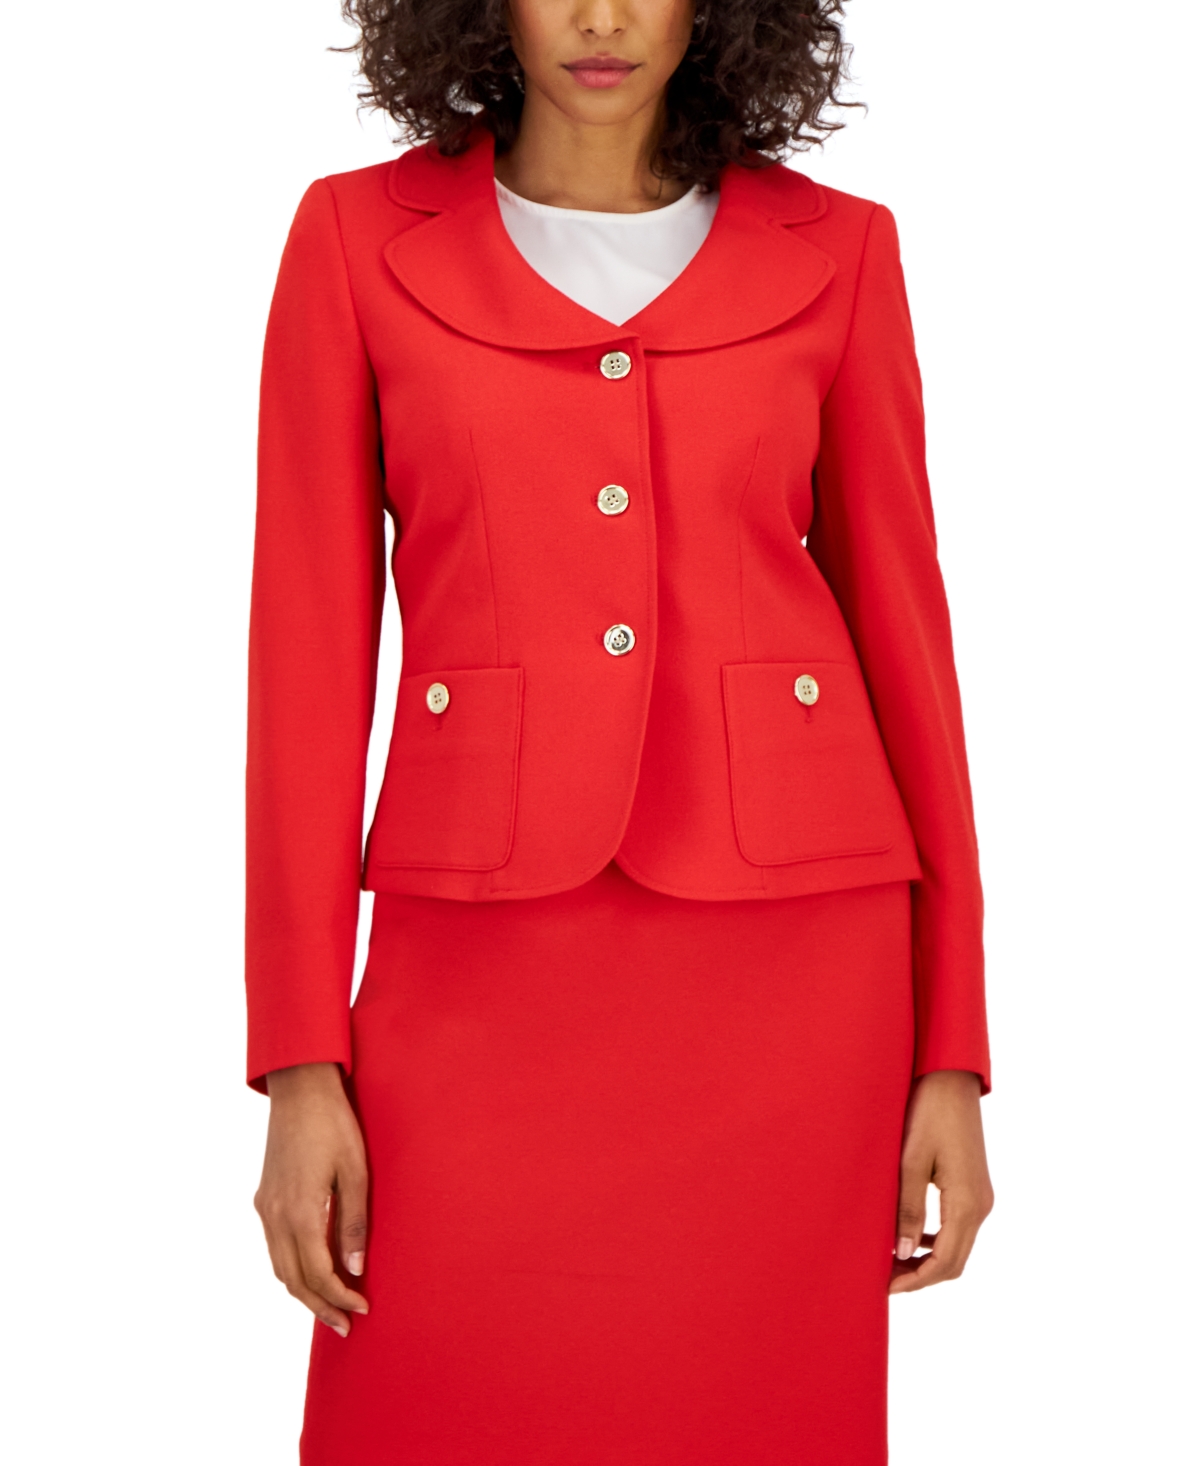 Women's Curved Collar Button-Front Jacket & Pencil Skirt Suit - Cherry Sprig